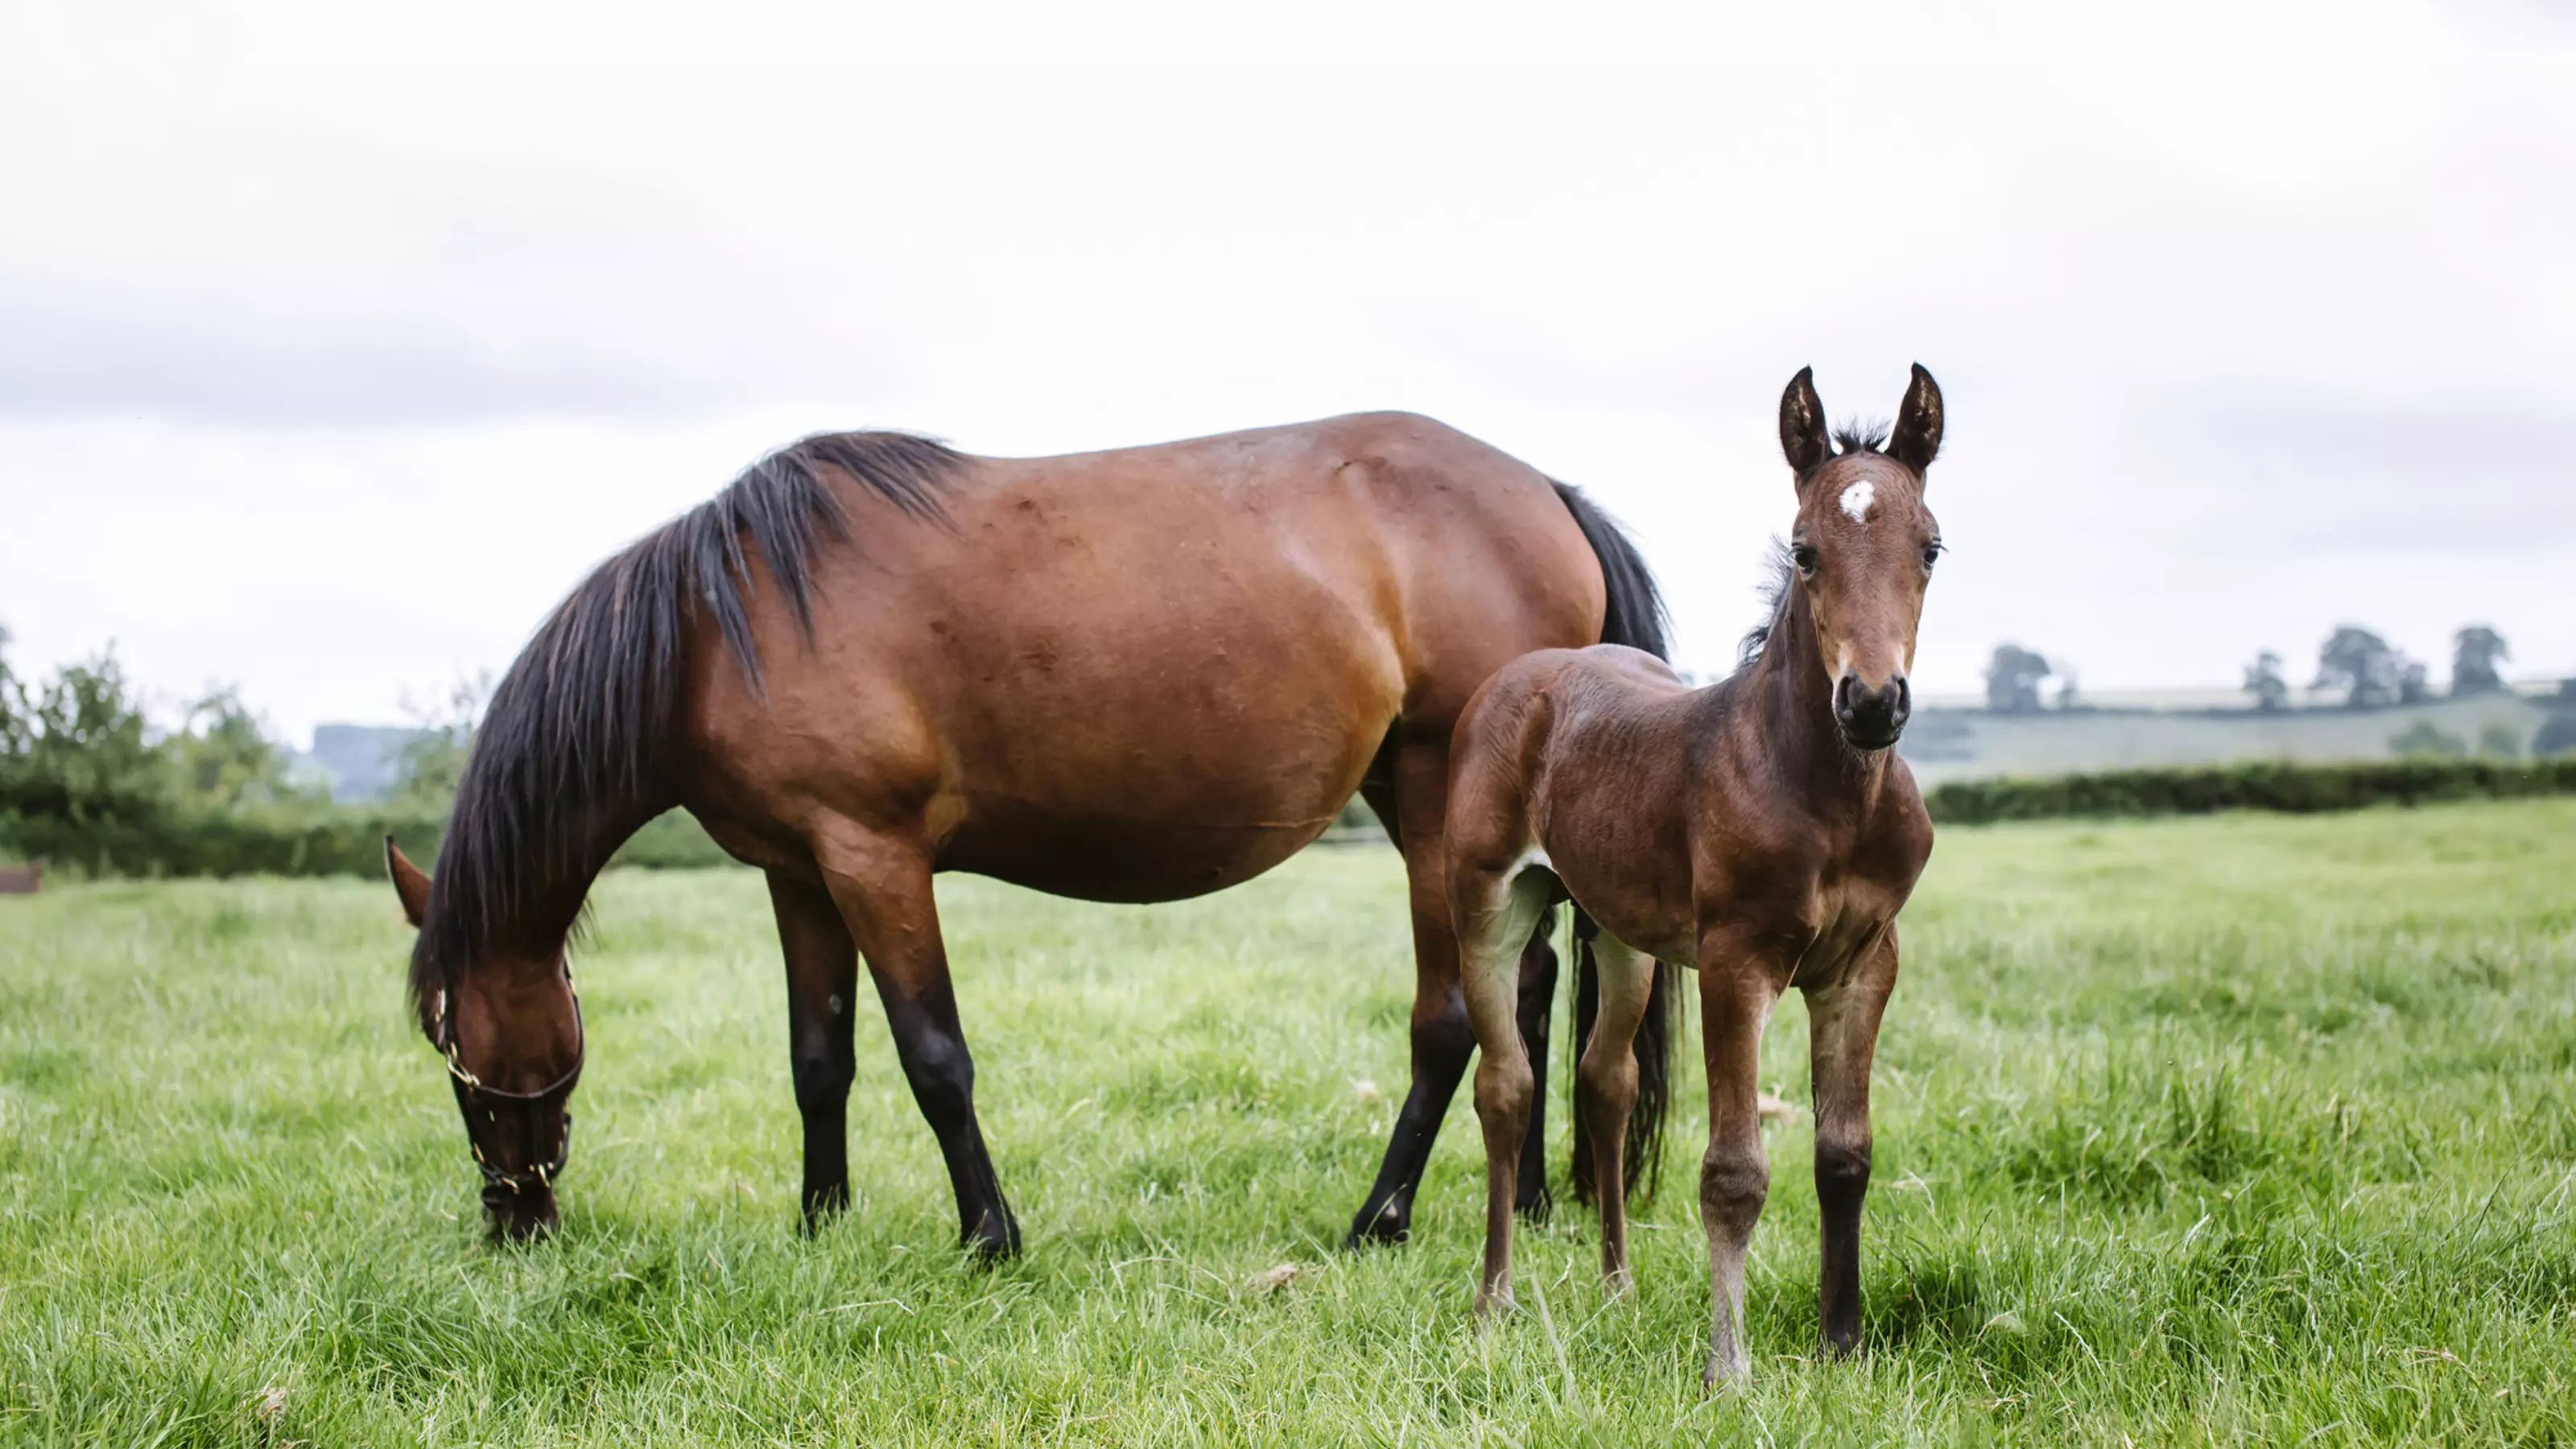 Horse grazing with foal in a field 